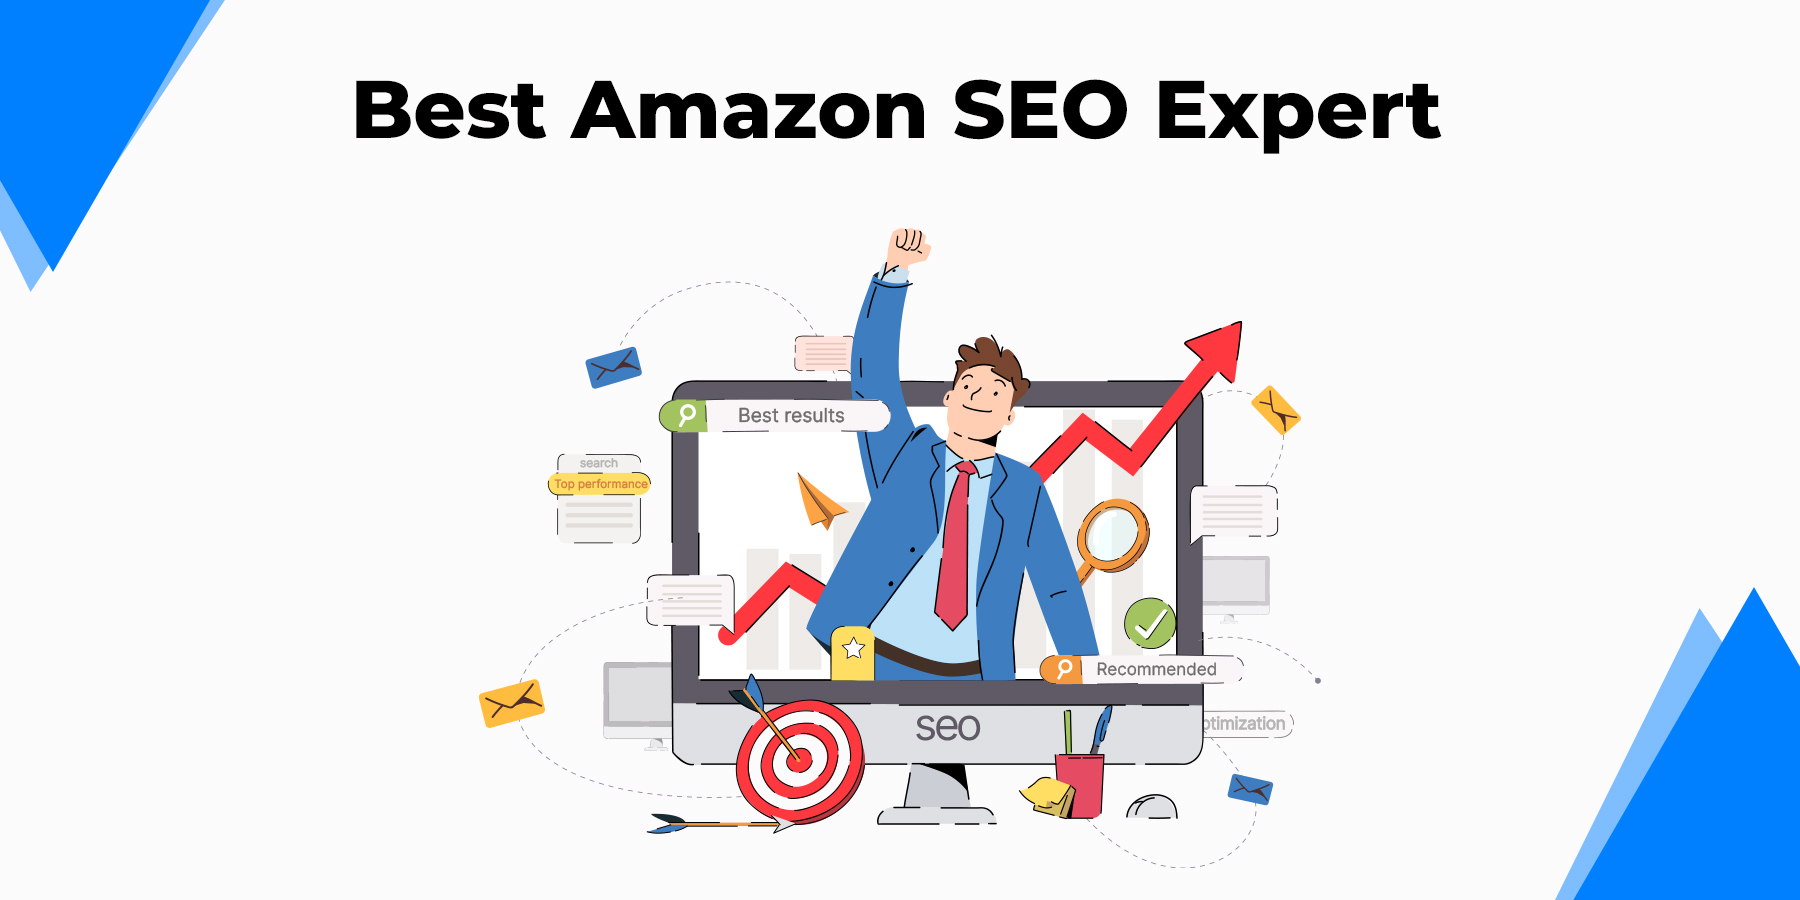 How To Find The Best Amazon Seo Expert For Your Business